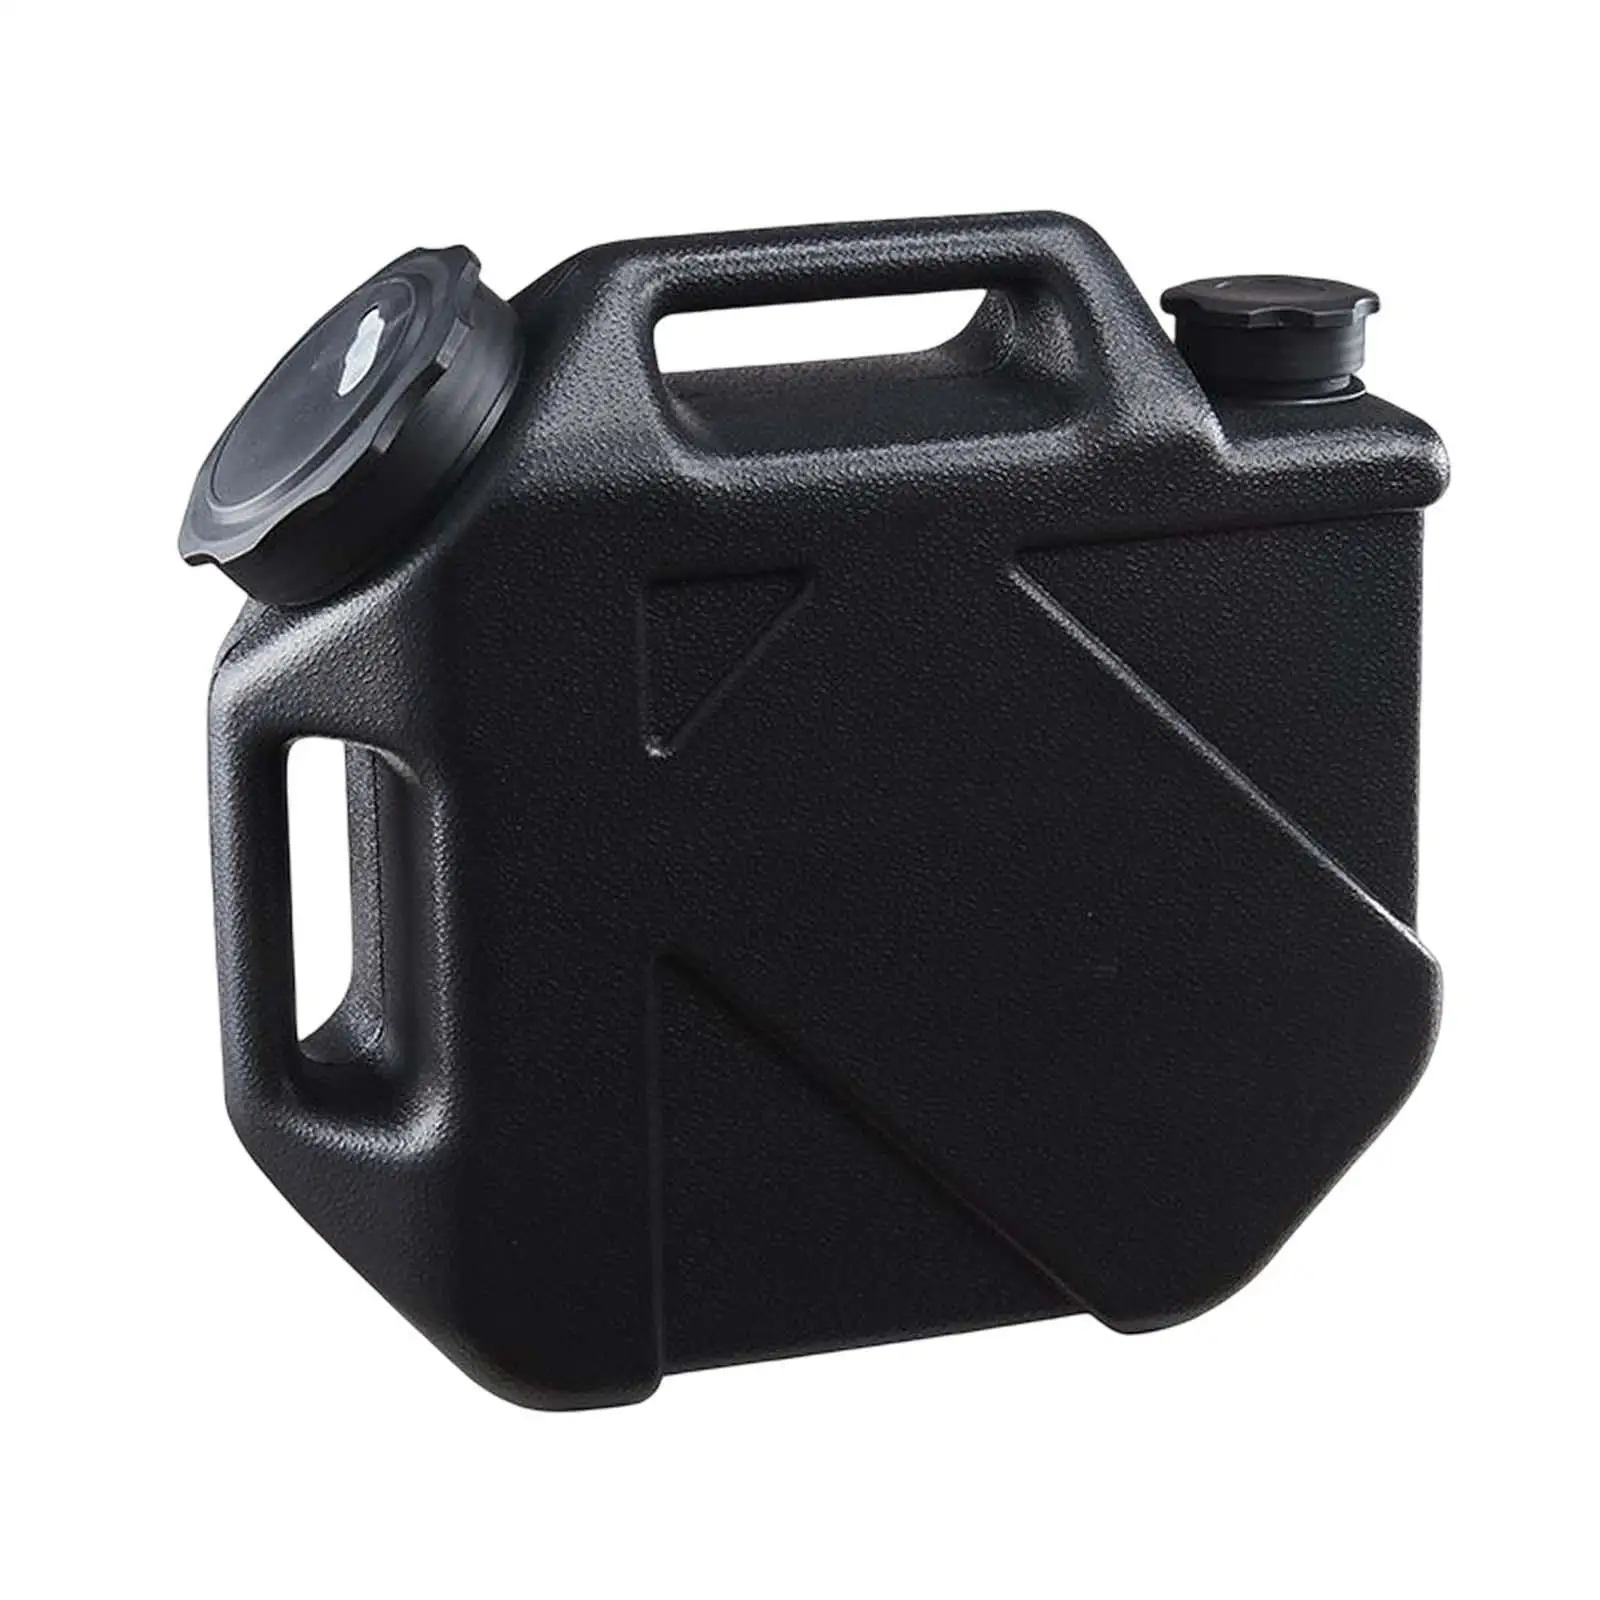 Camping Water Pitcher 10 L/2.64 Gallon Water Pitcher for Survival